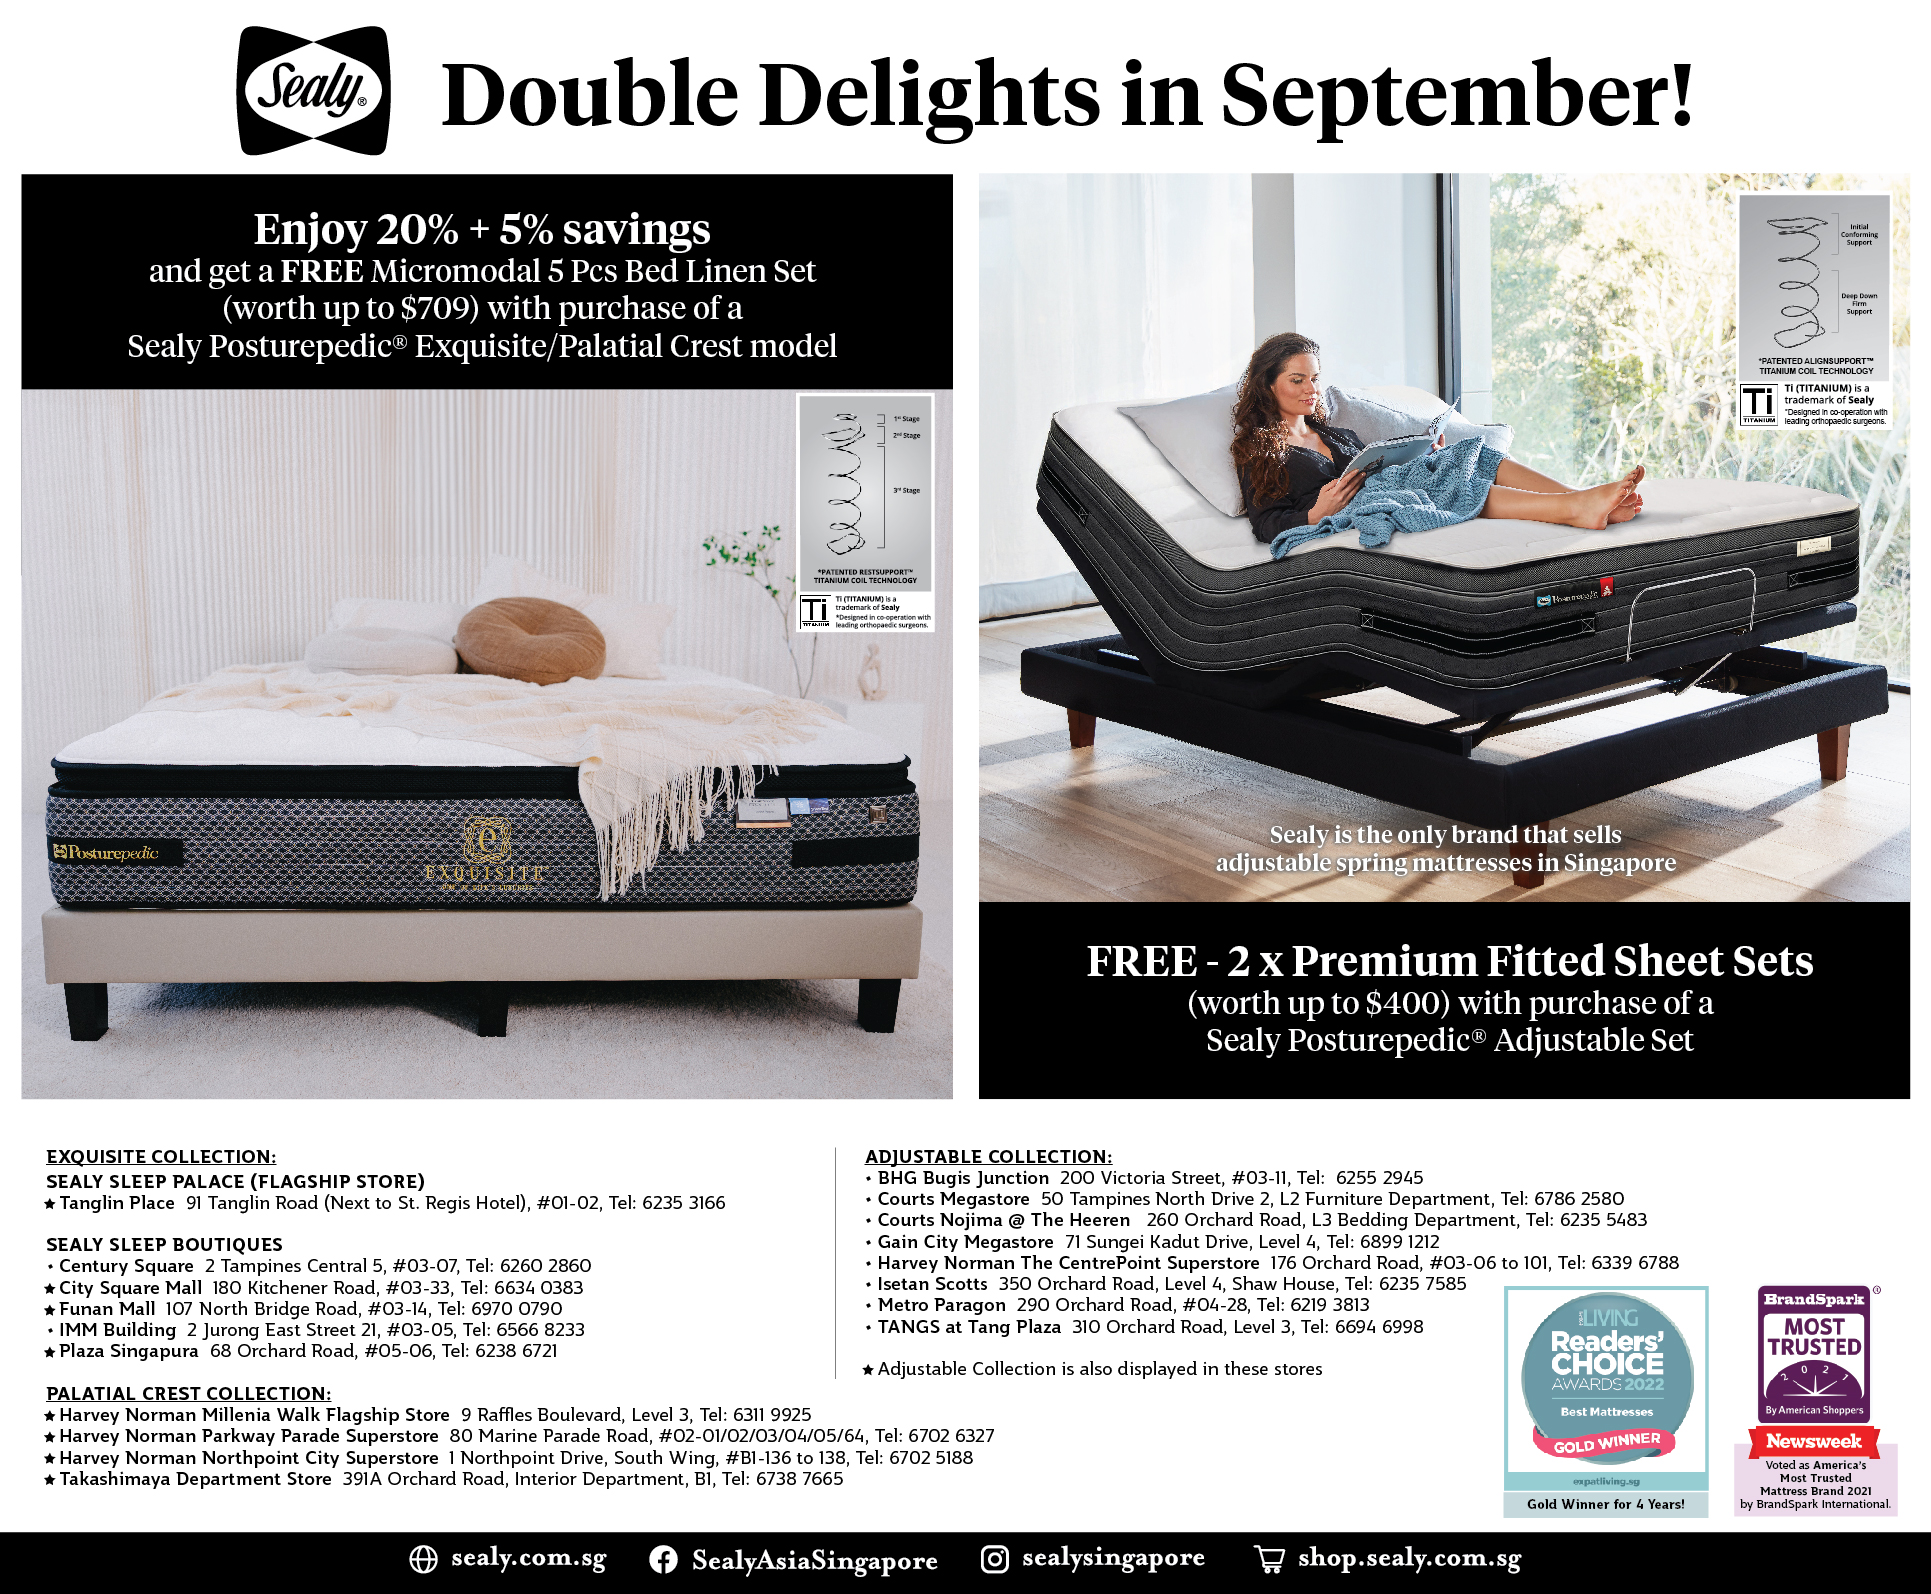 Double Delights Promotion